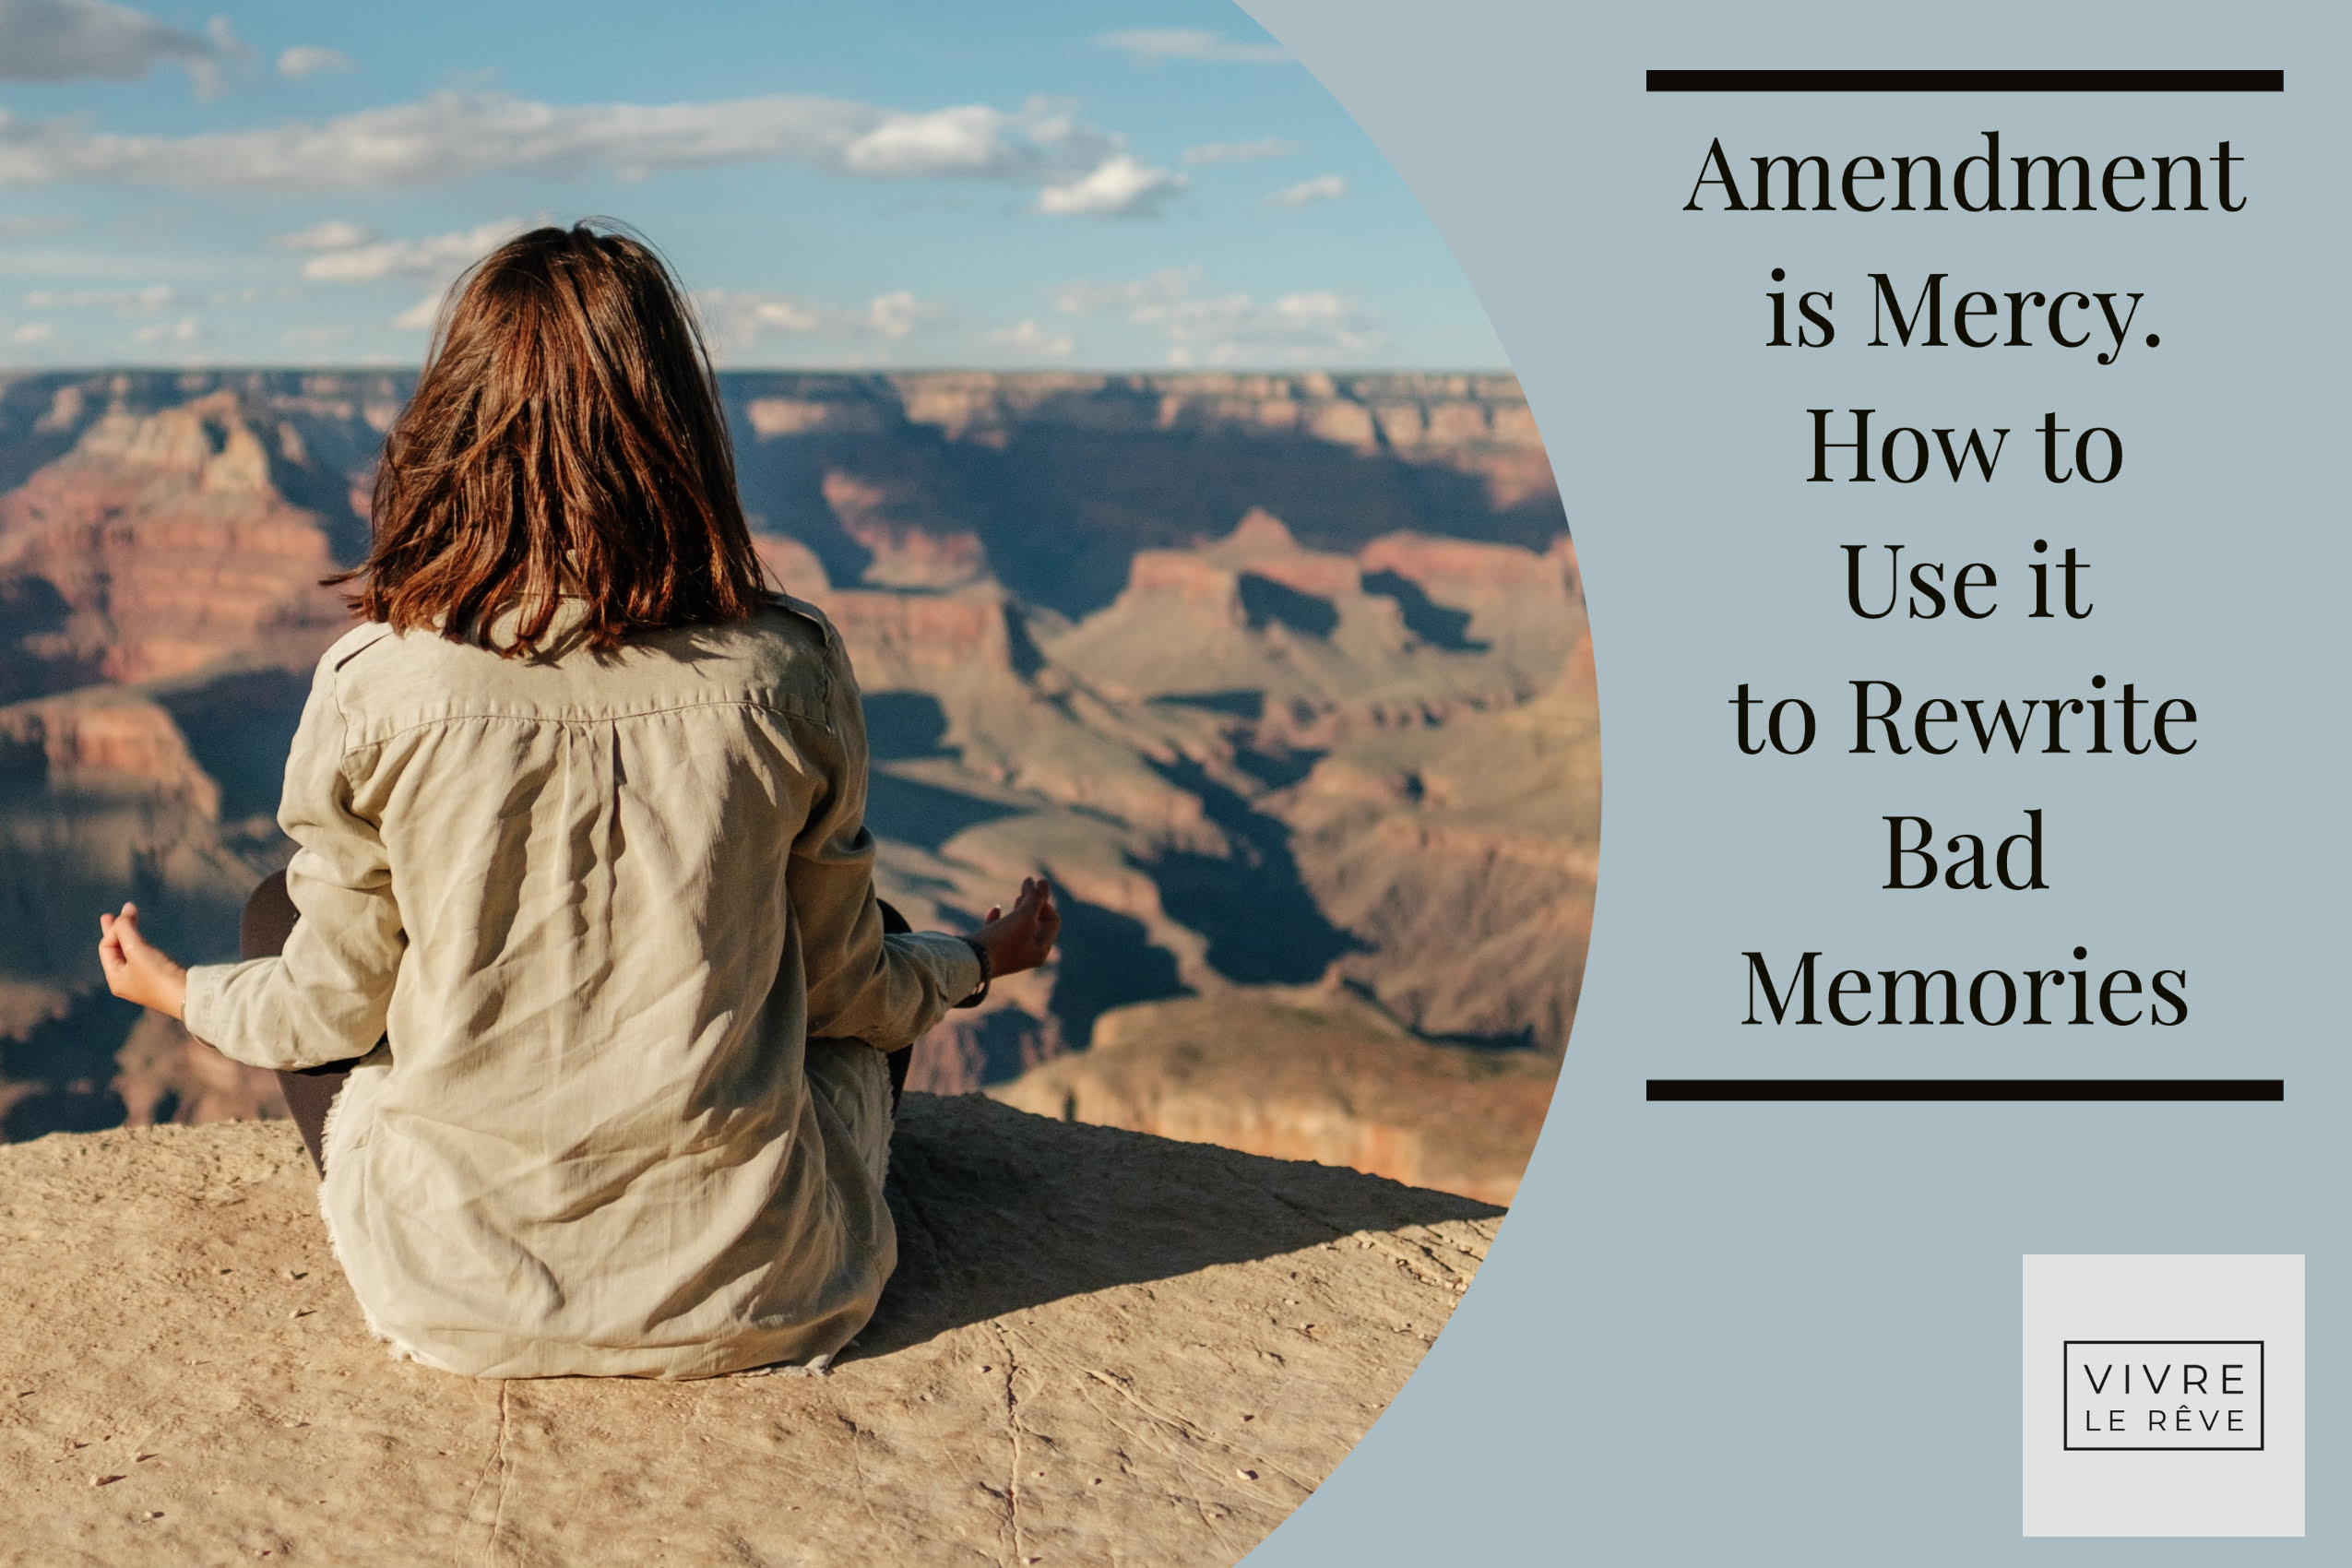 Amendment is Mercy. How to Use it to Rewrite Bad Memories